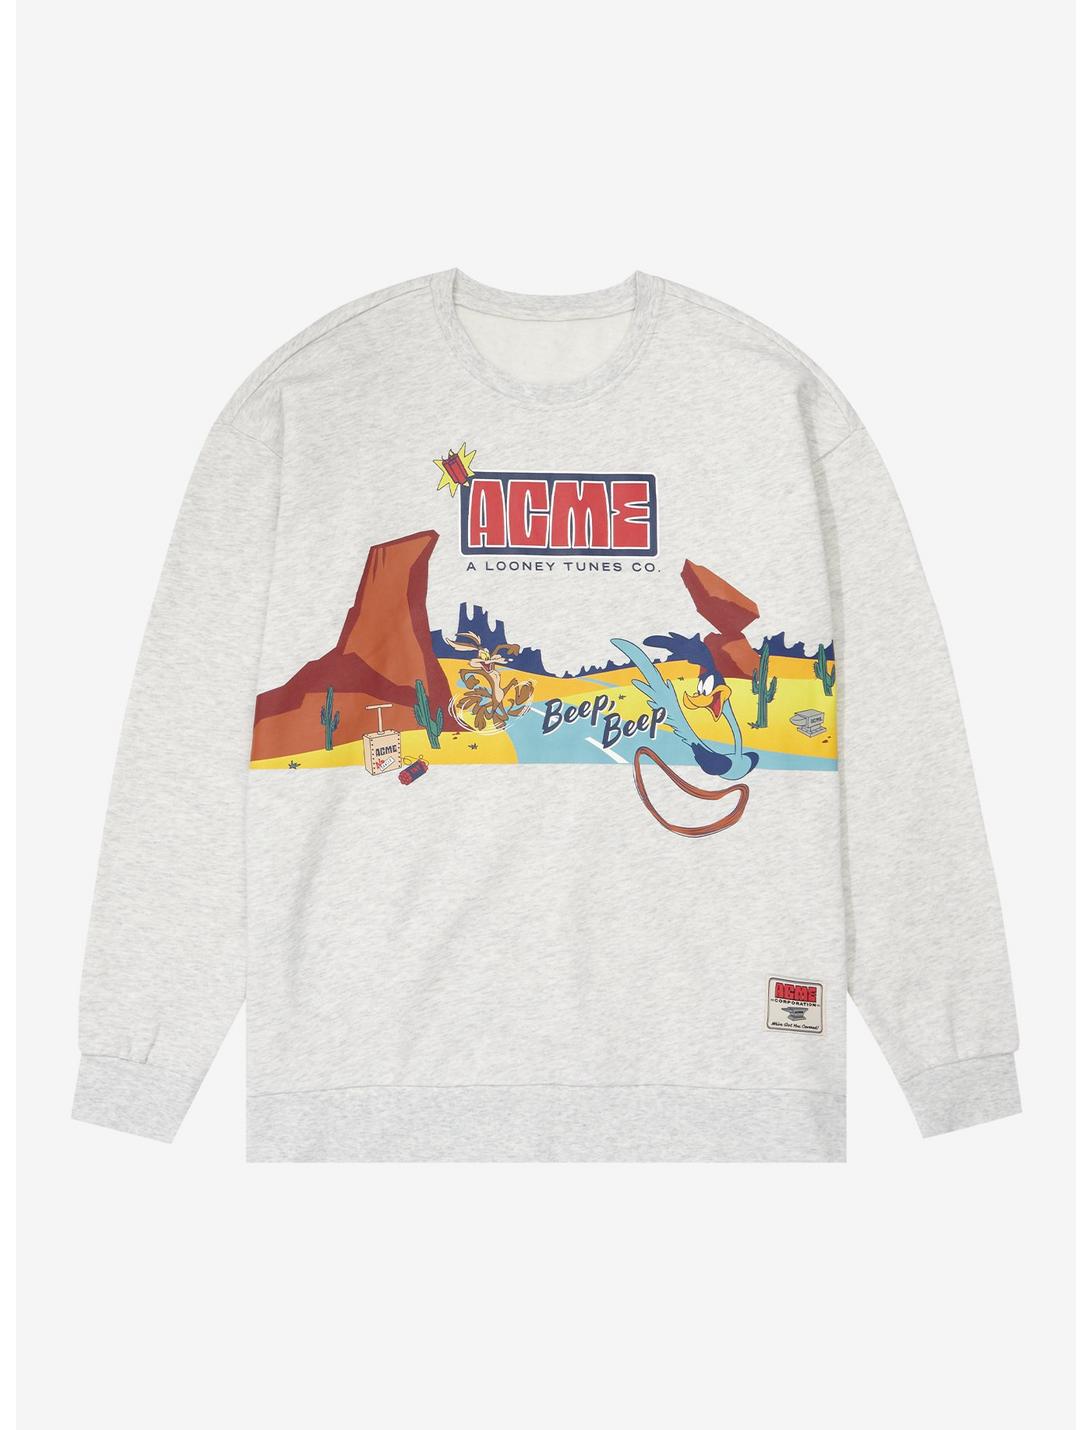 Looney Tunes ACME Wile. E Coyote & Road Runner Crewneck - BoxLunch 